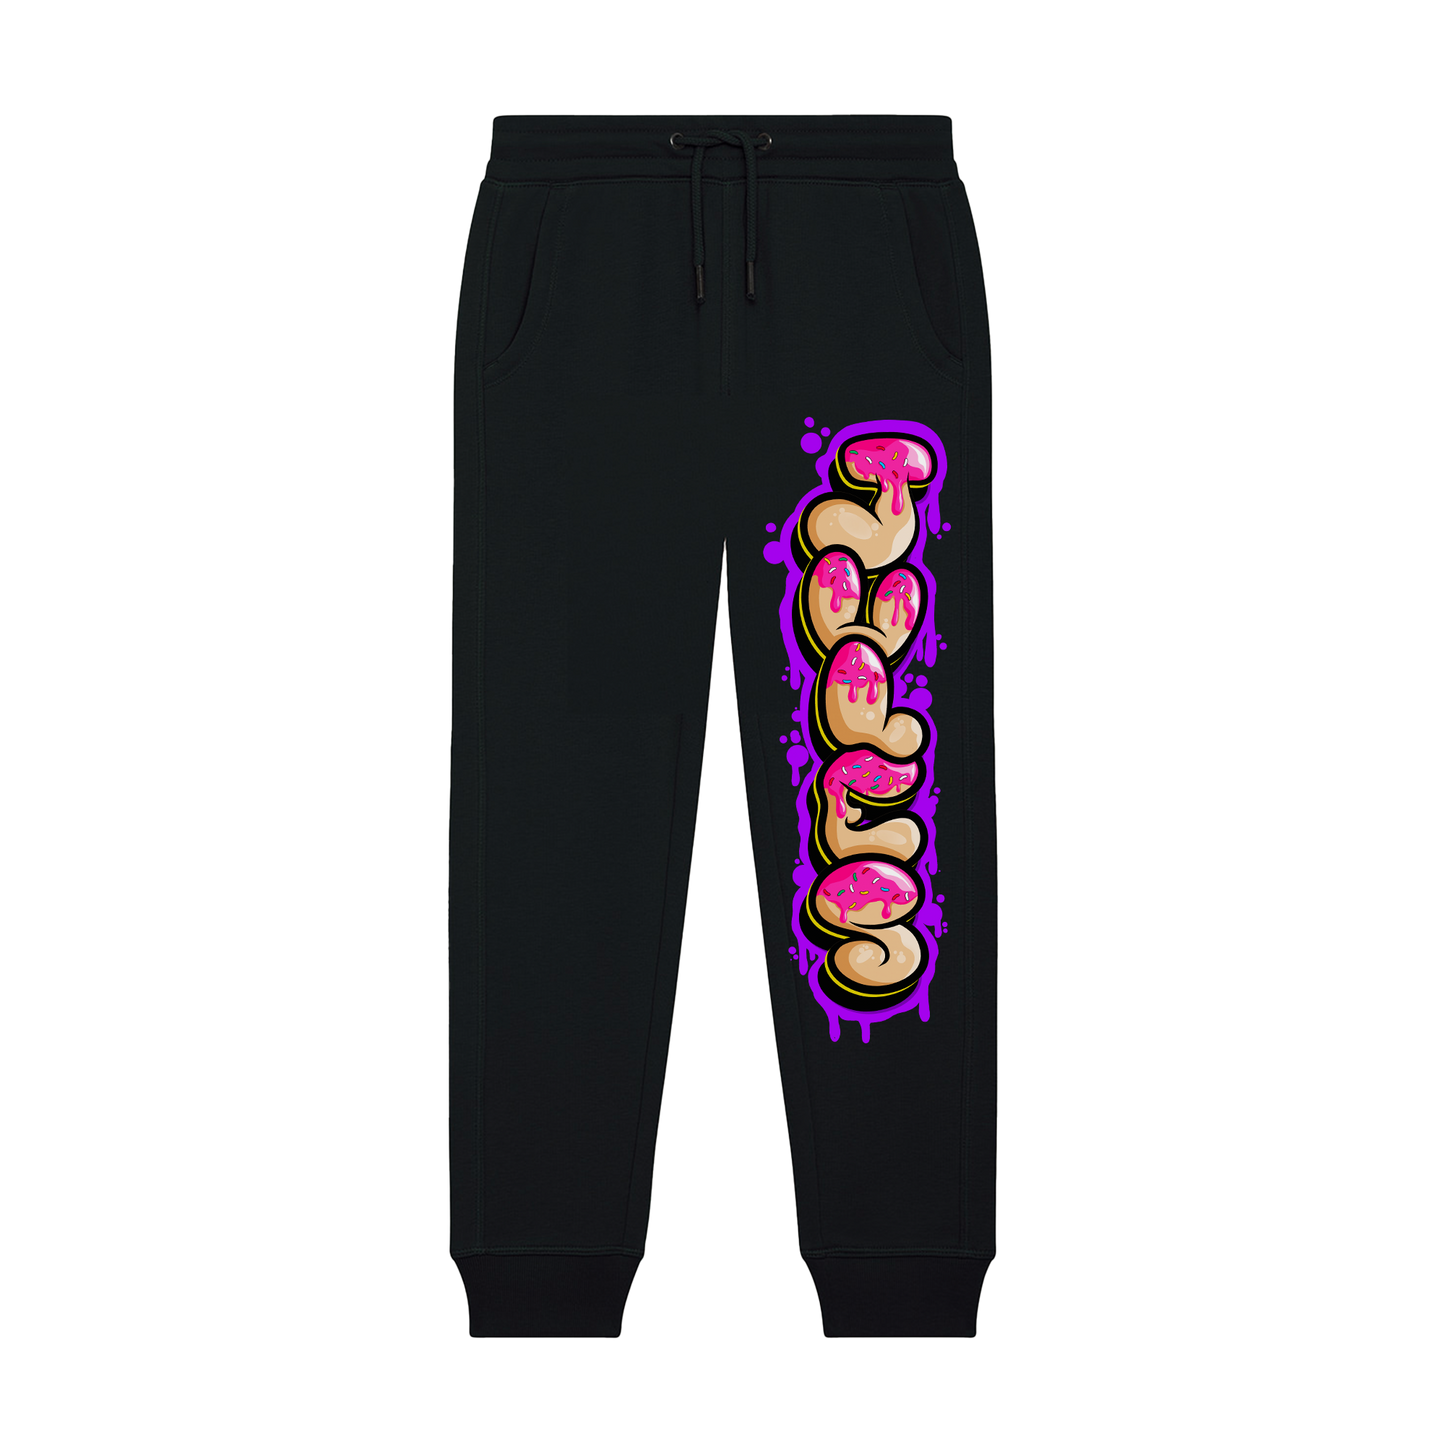 Wildstyle Joggers